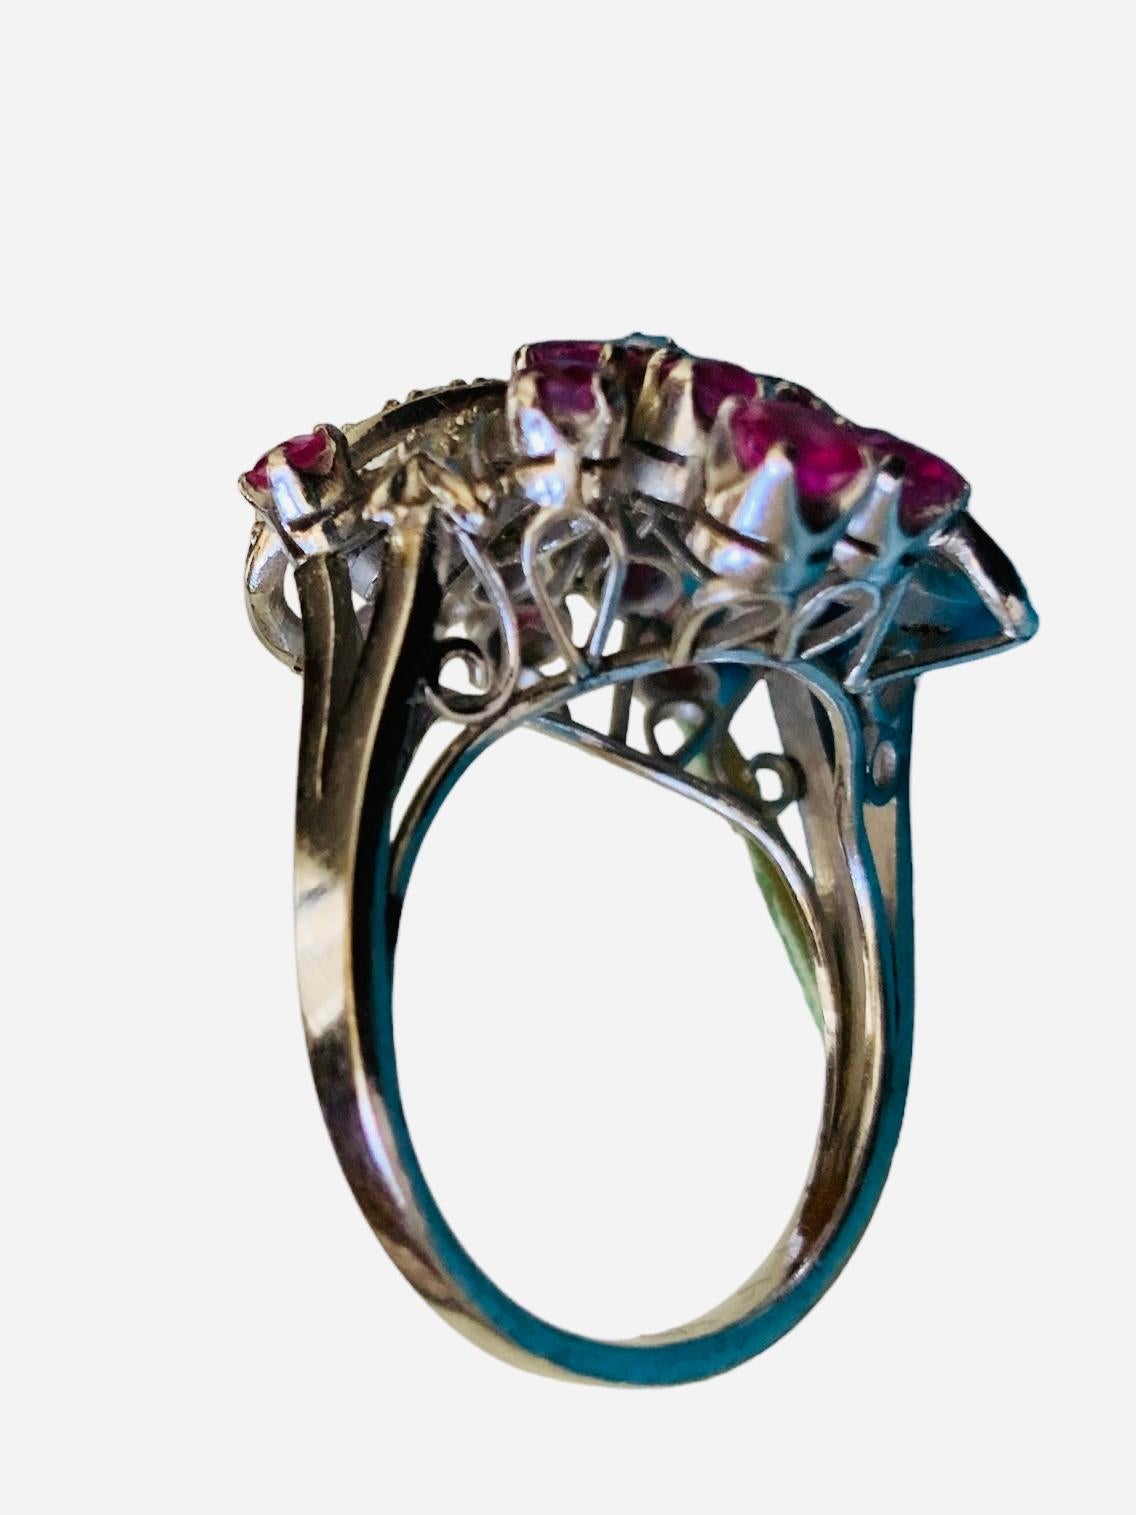 14k White Gold Ruby Cocktail Ring In Good Condition For Sale In Guaynabo, PR